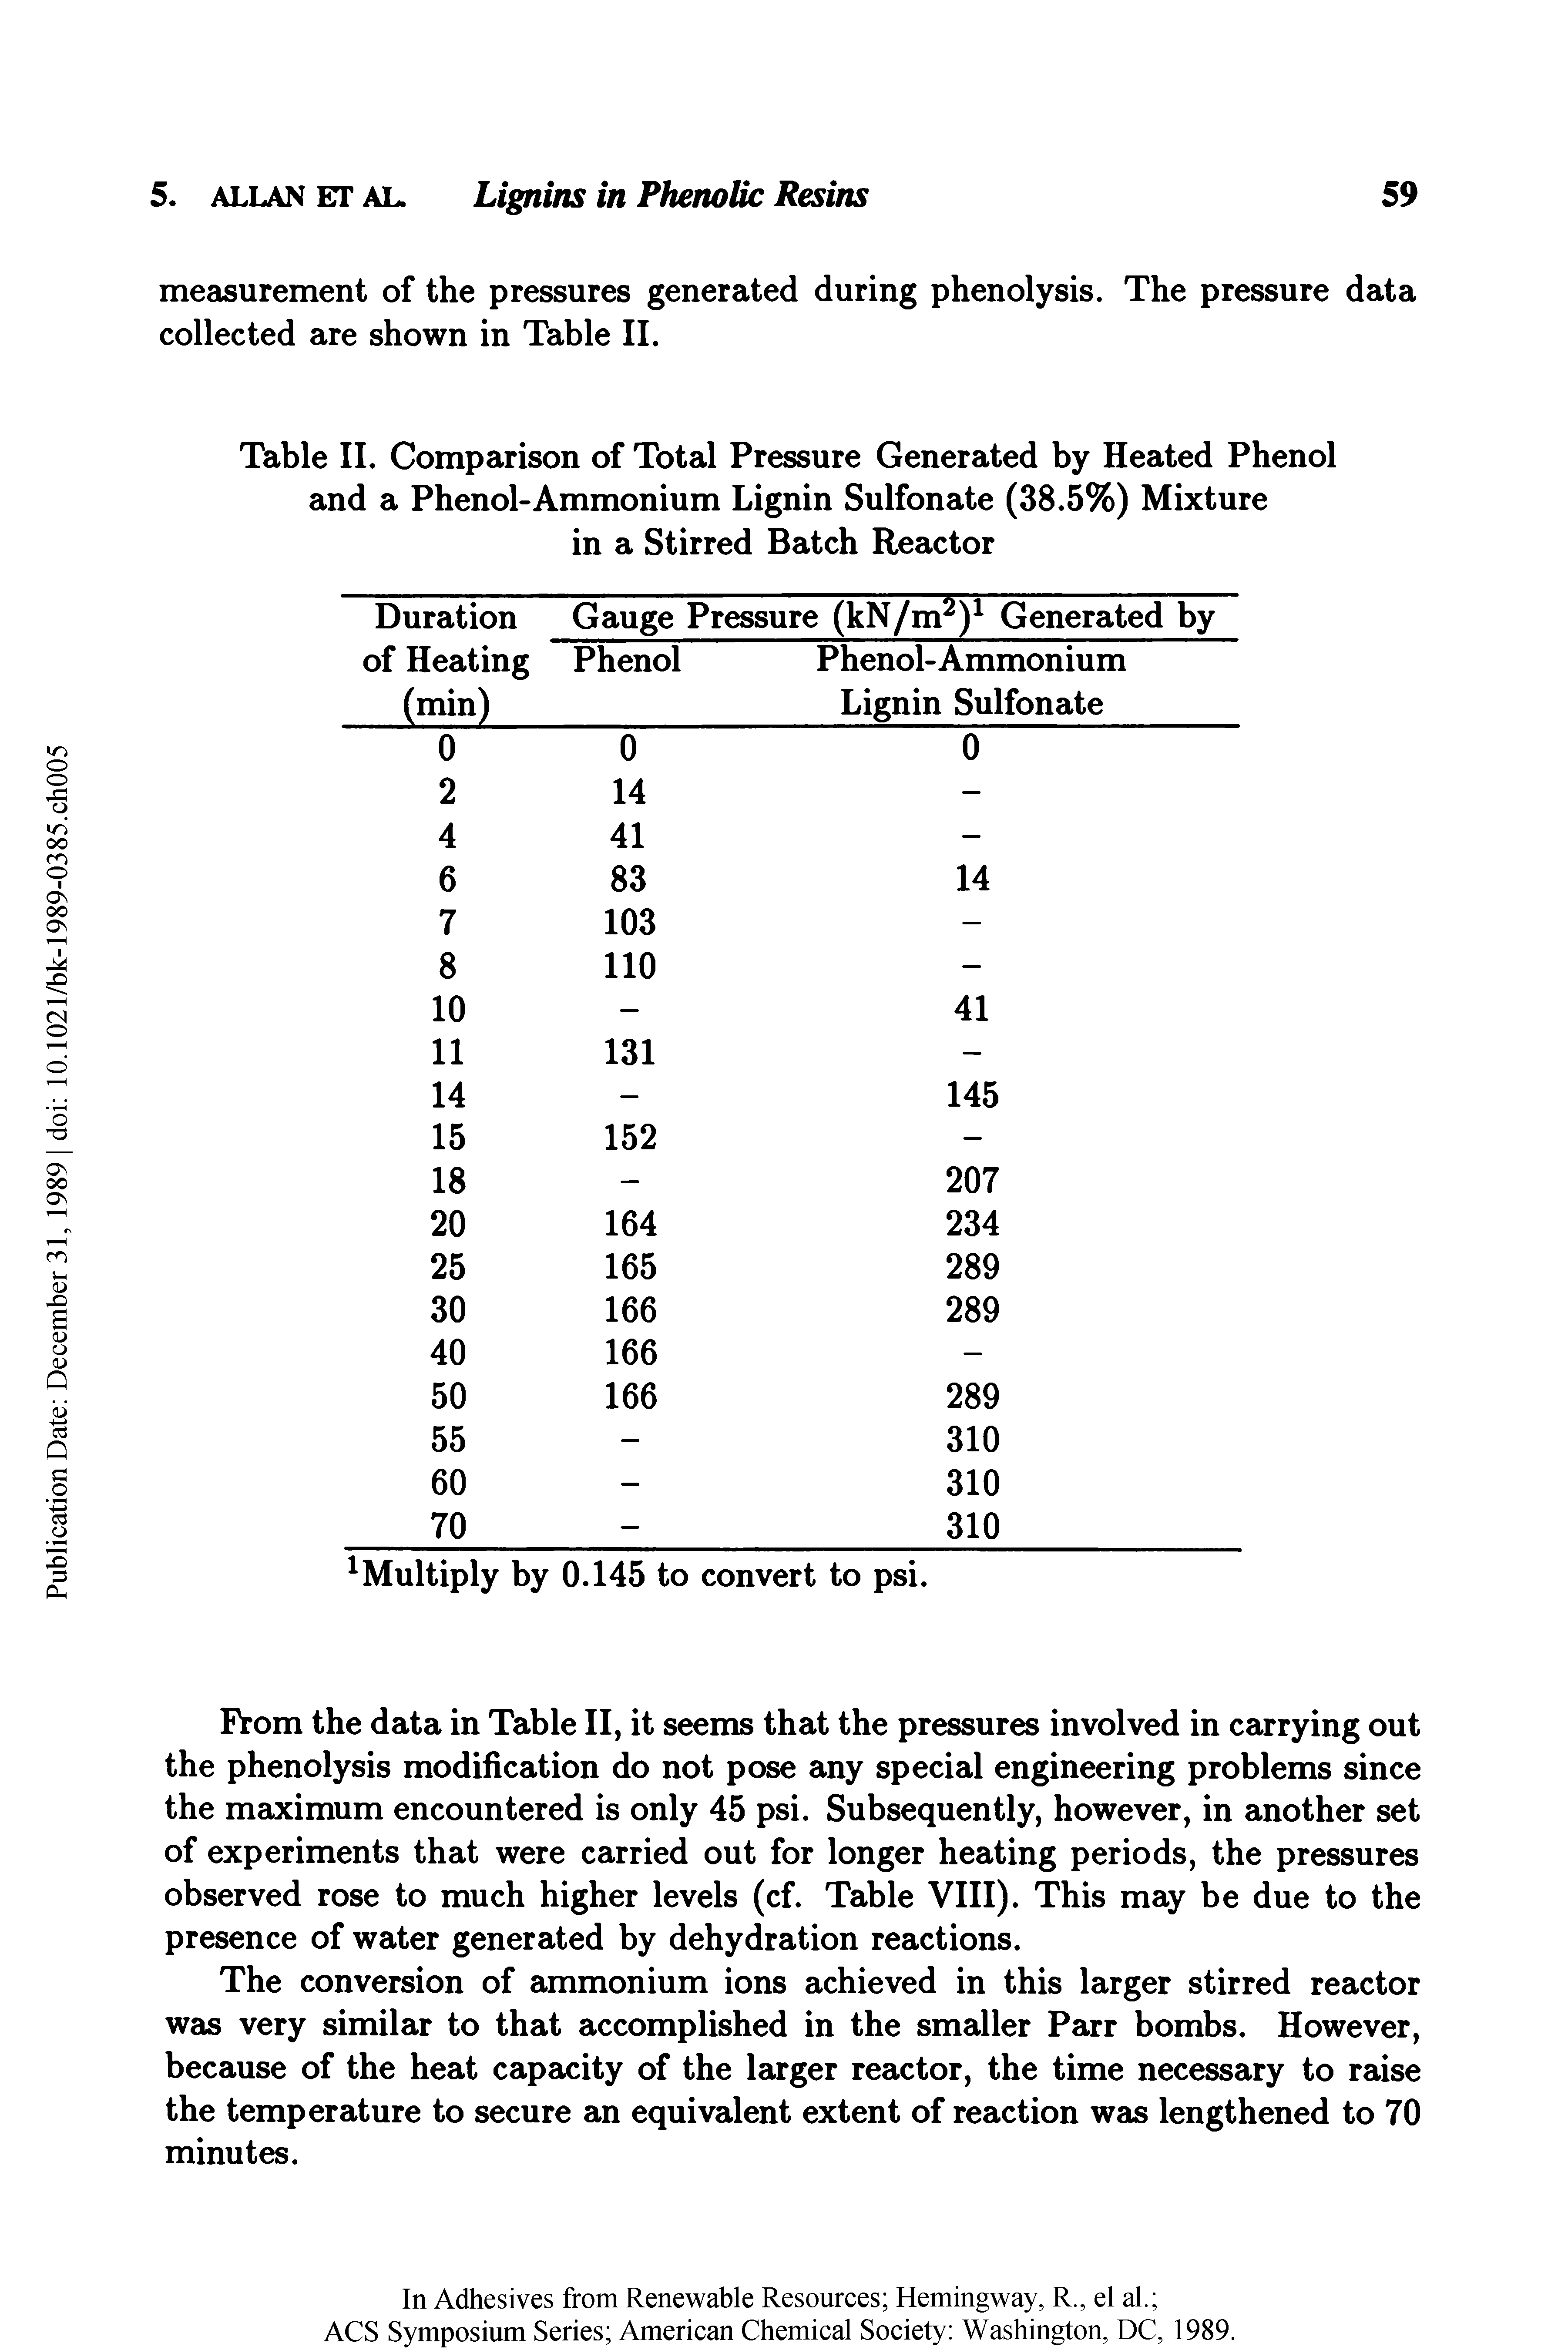 Table II. Comparison of Total Pressure Generated by Heated Phenol and a Phenol-Ammonium Lignin Sulfonate (38.5%) Mixture in a Stirred Batch Reactor...